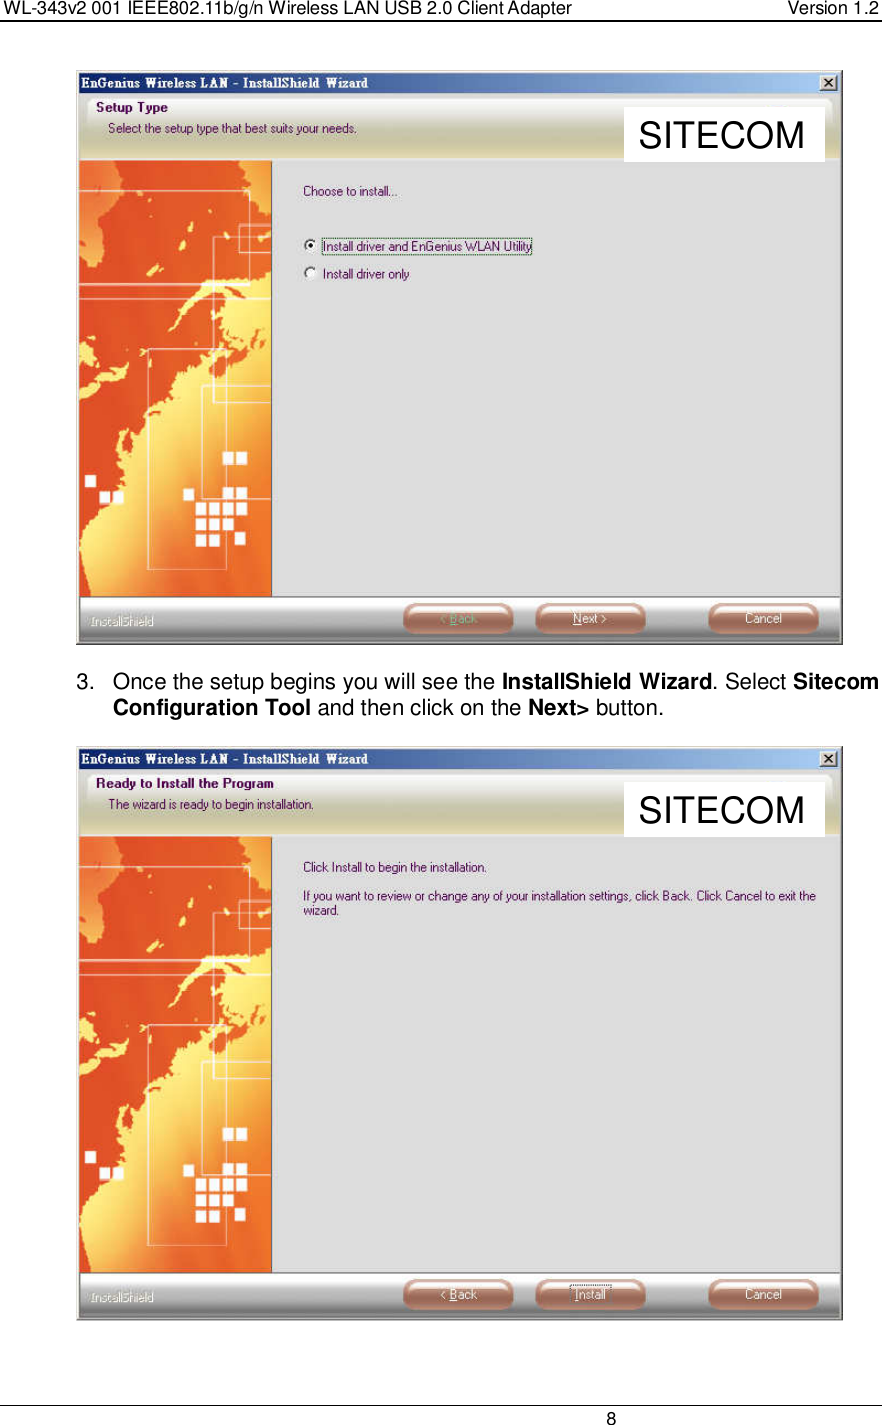 WL-343v2 001 IEEE802.11b/g/n Wireless LAN USB 2.0 Client Adapter  Version 1.2                                                                                                                         8    3.  Once the setup begins you will see the InstallShield Wizard. Select Sitecom Configuration Tool and then click on the Next&gt; button.      SITECOM SITECOM 